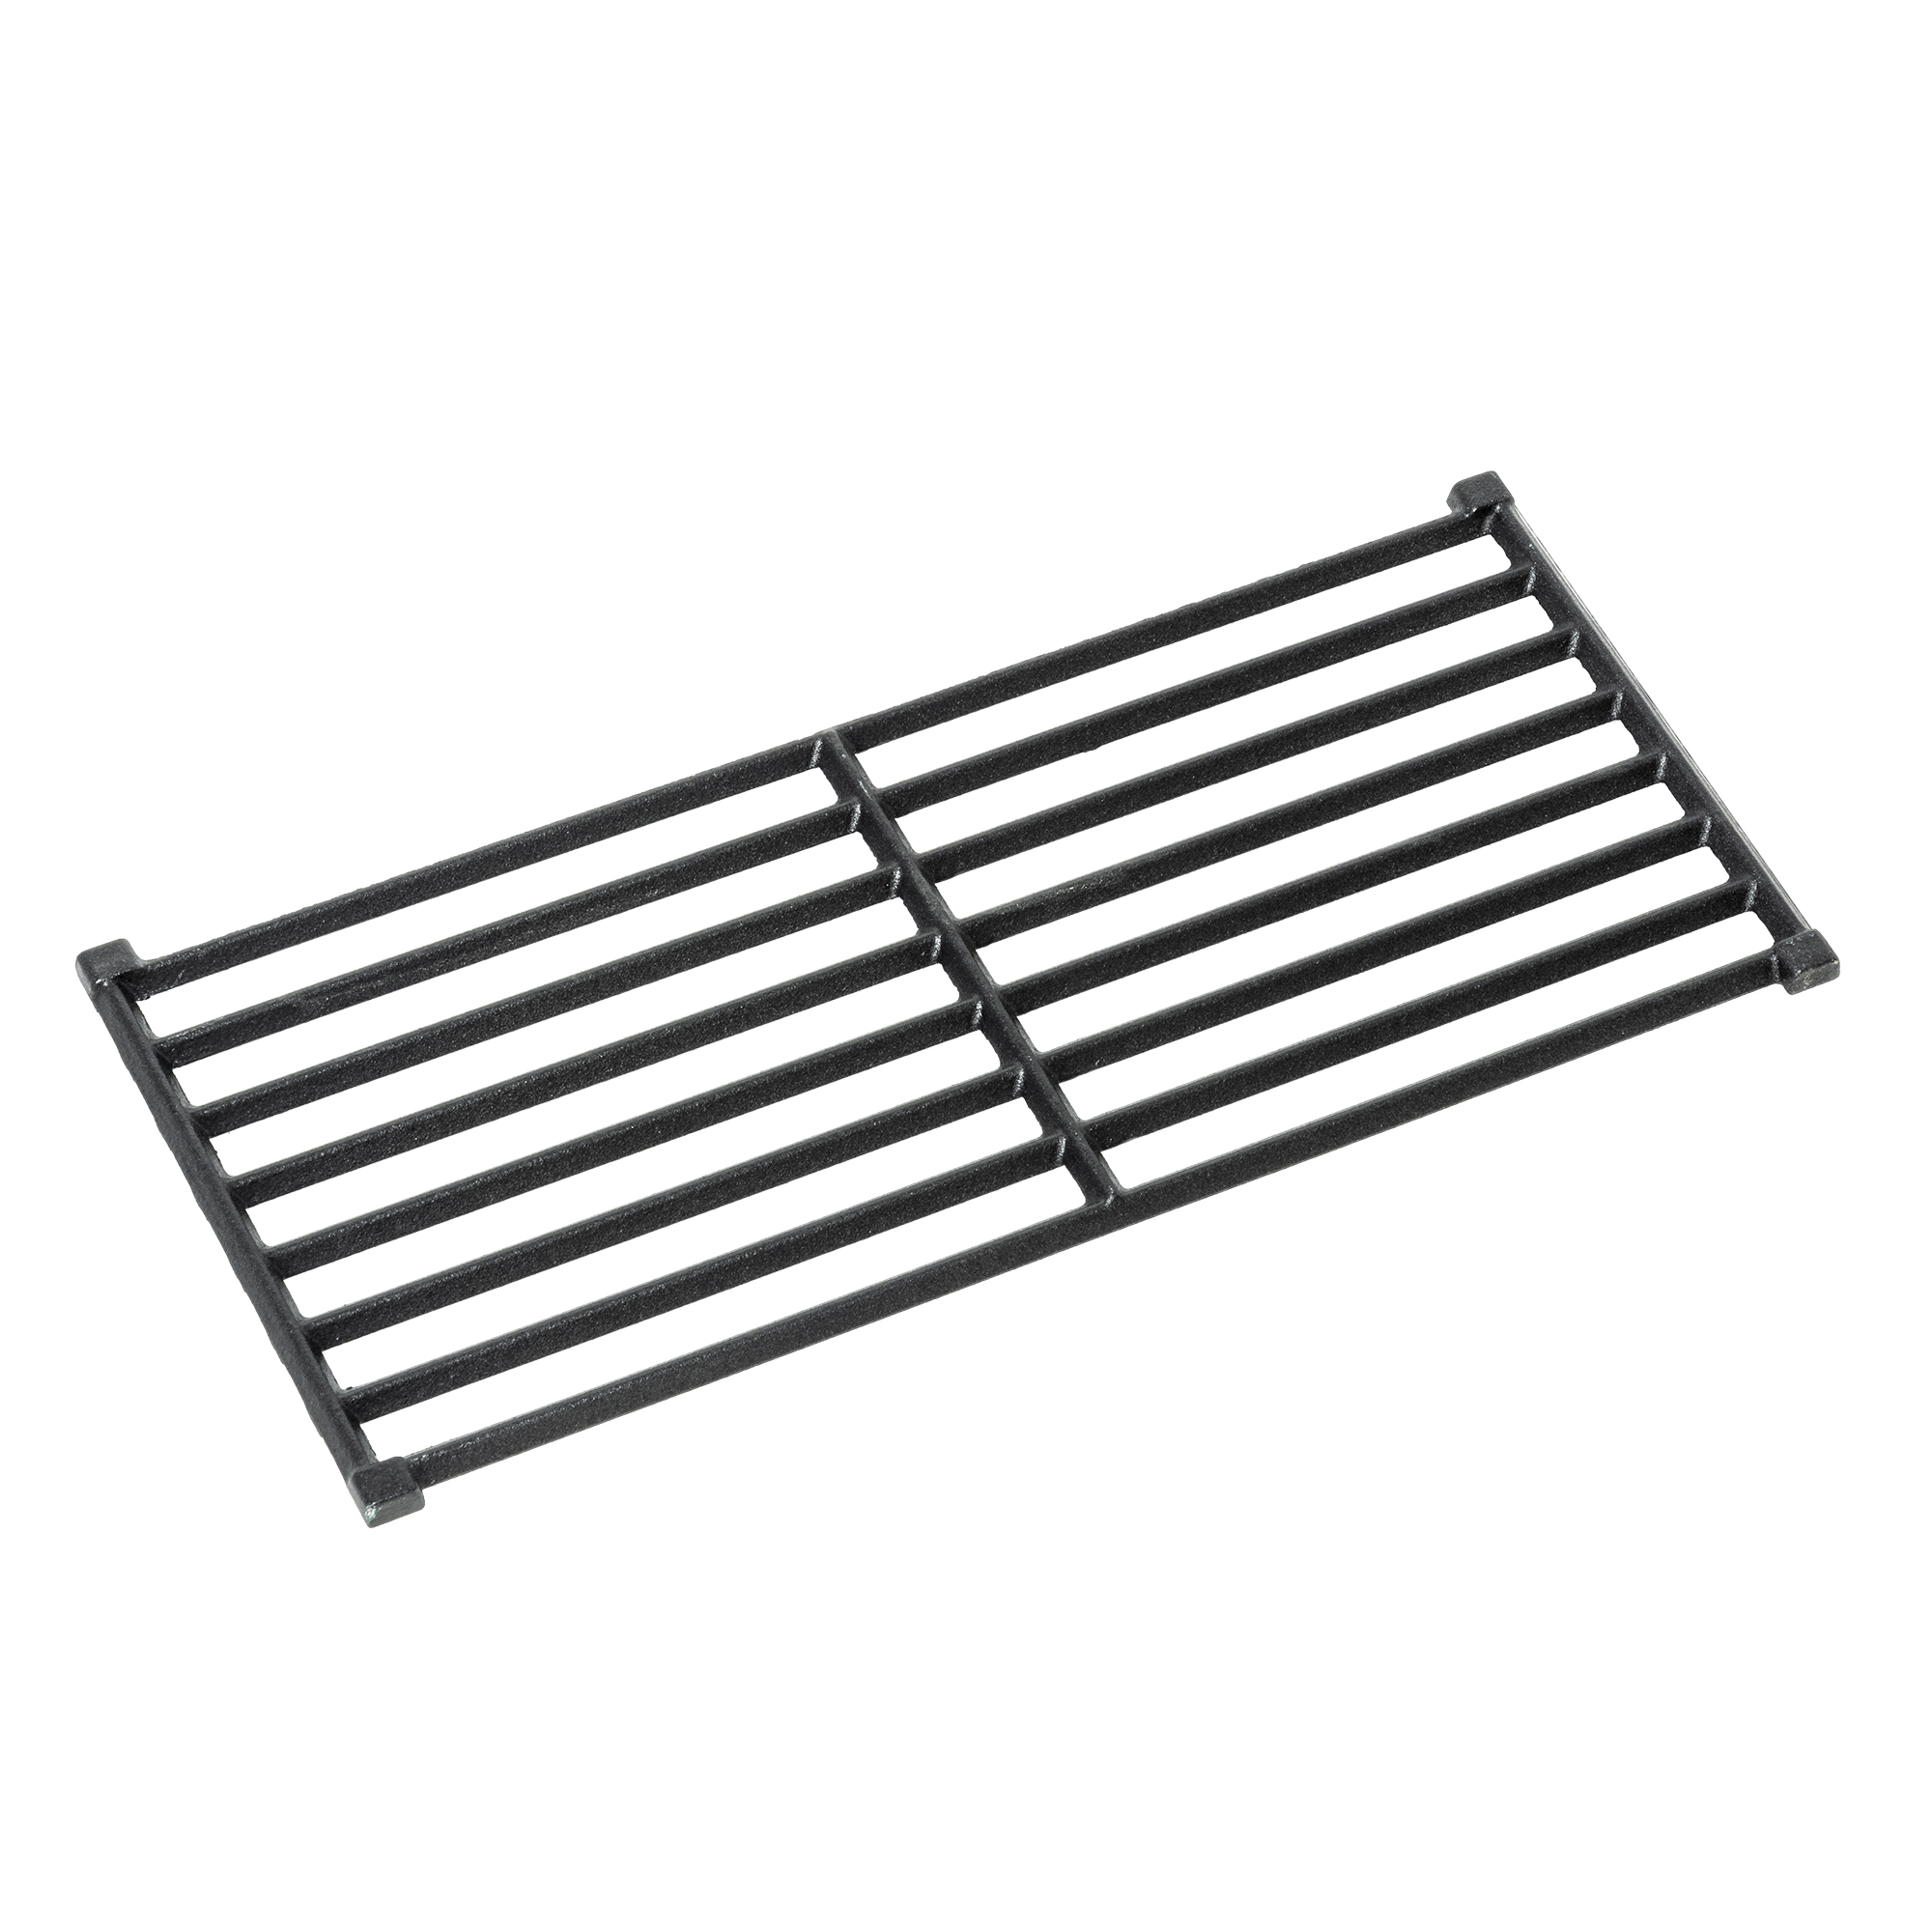 Grilling Grate small Artiso G3 cast iron 18,5 x 41,5 cm